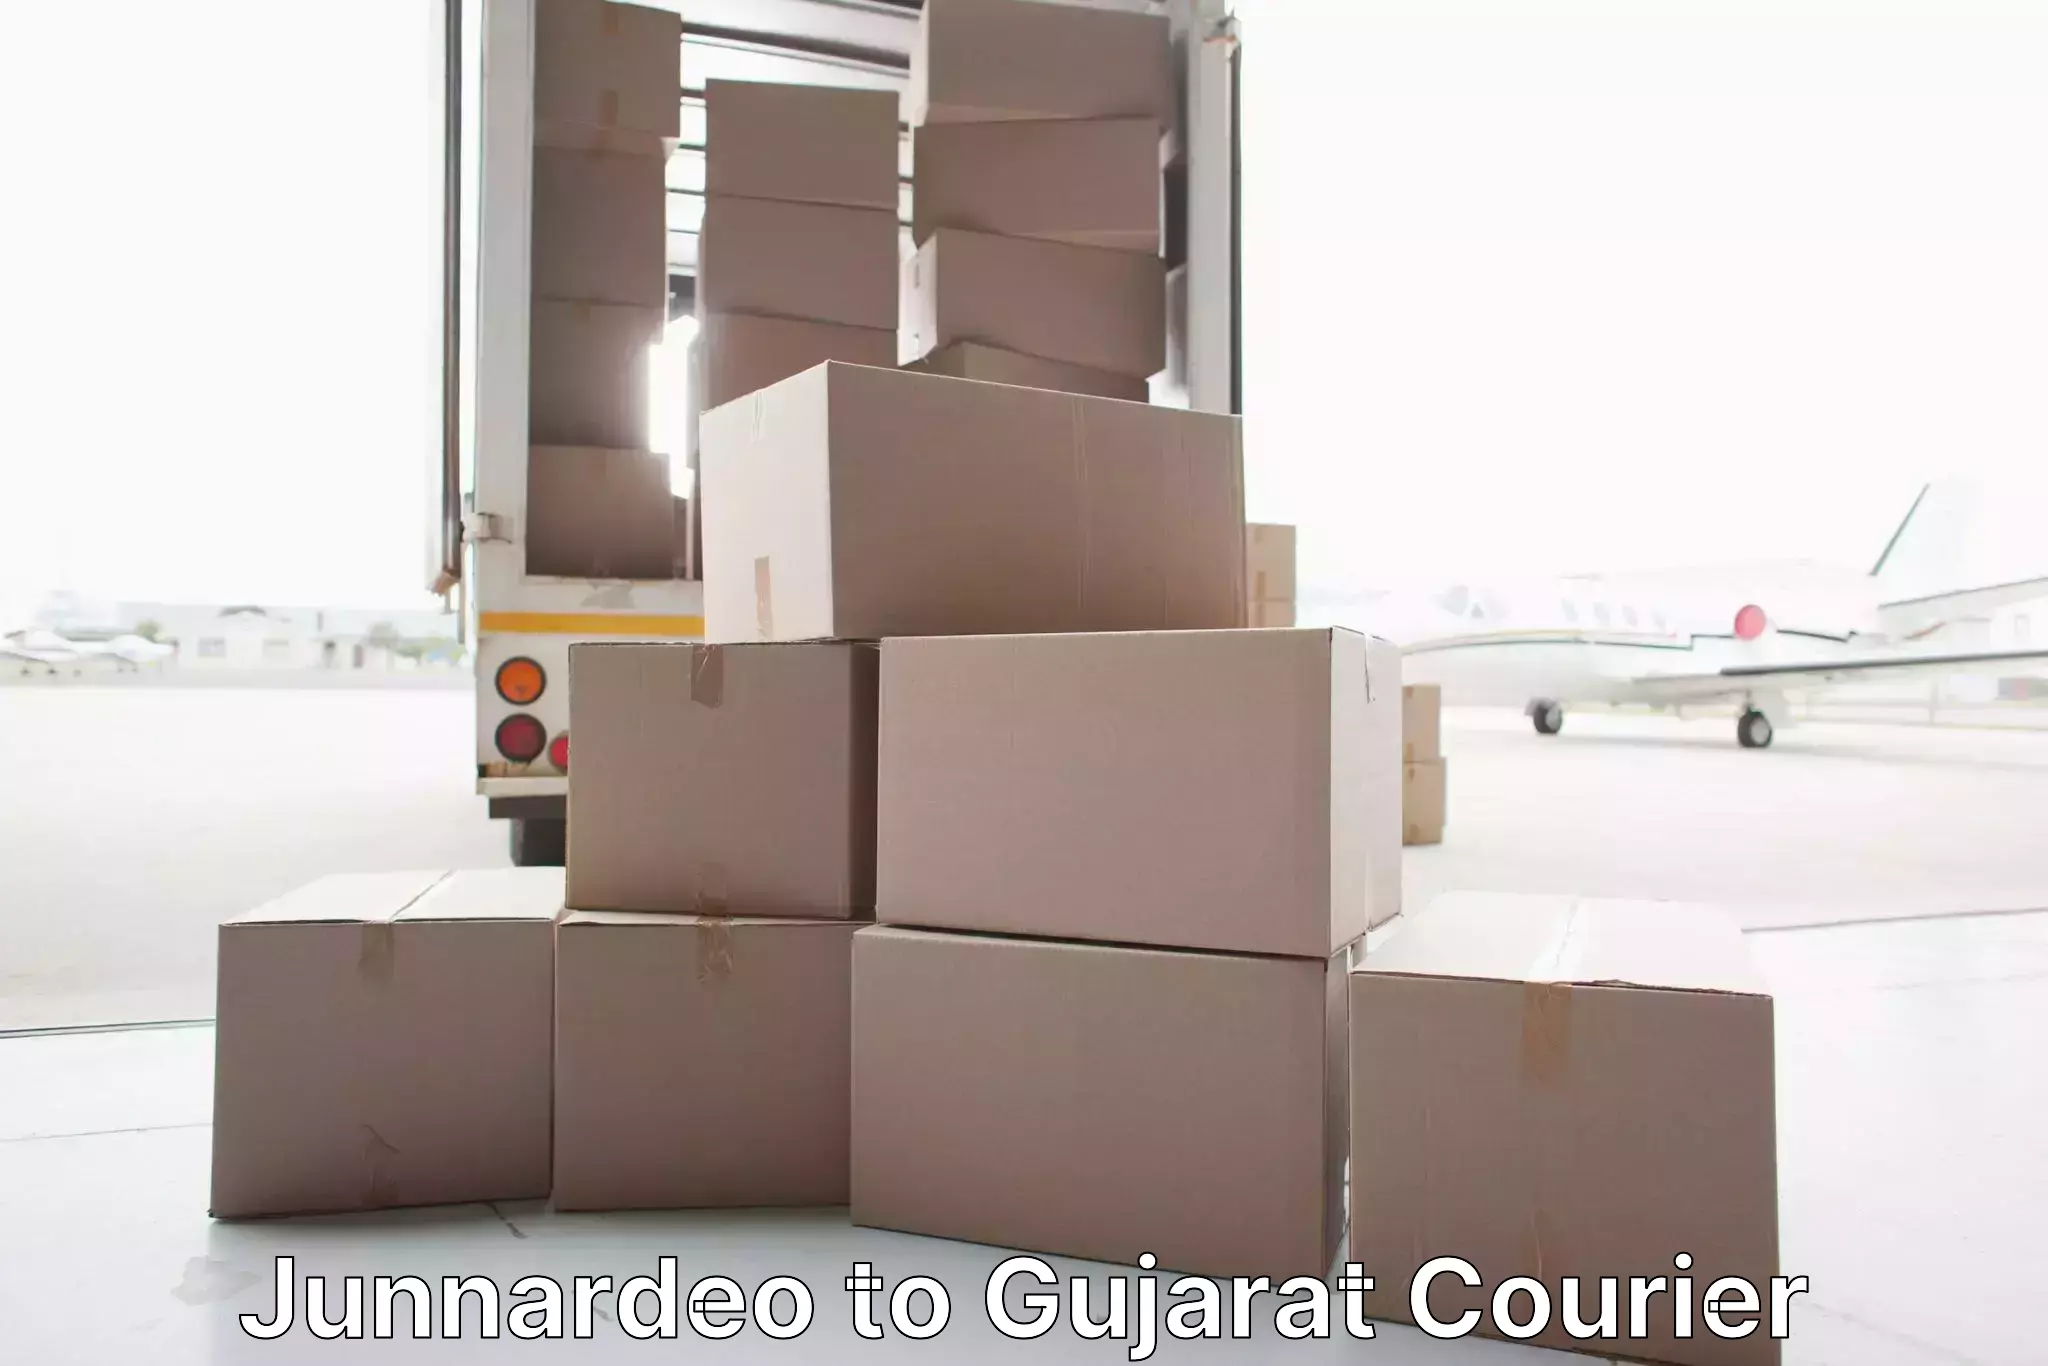 Hassle-free relocation Junnardeo to Gujarat